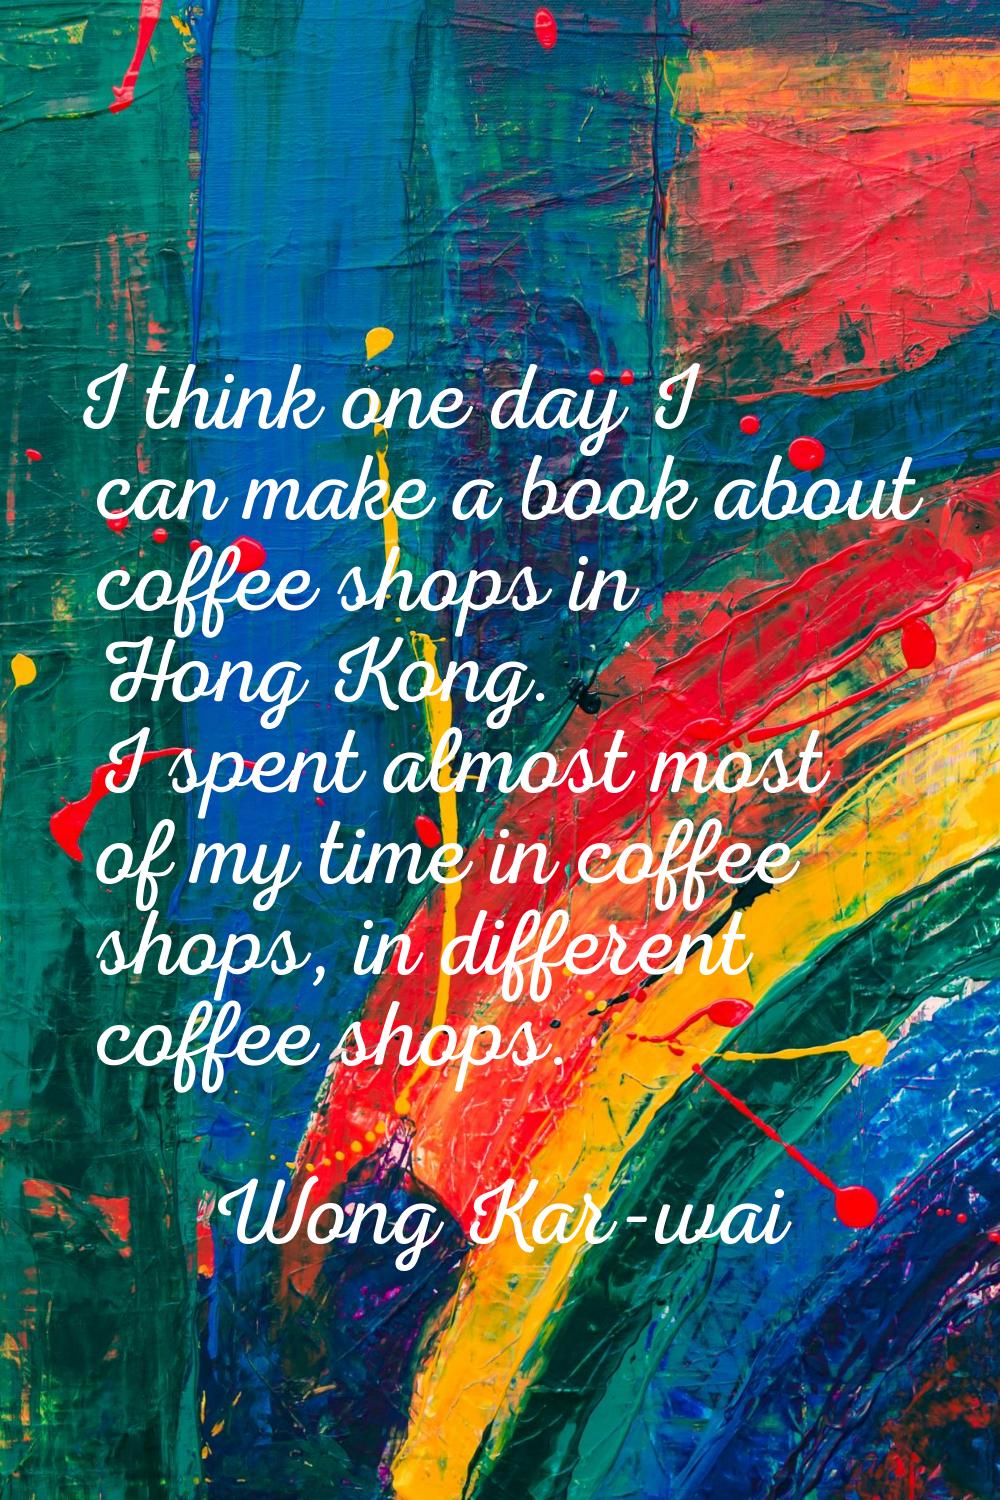 I think one day I can make a book about coffee shops in Hong Kong. I spent almost most of my time i